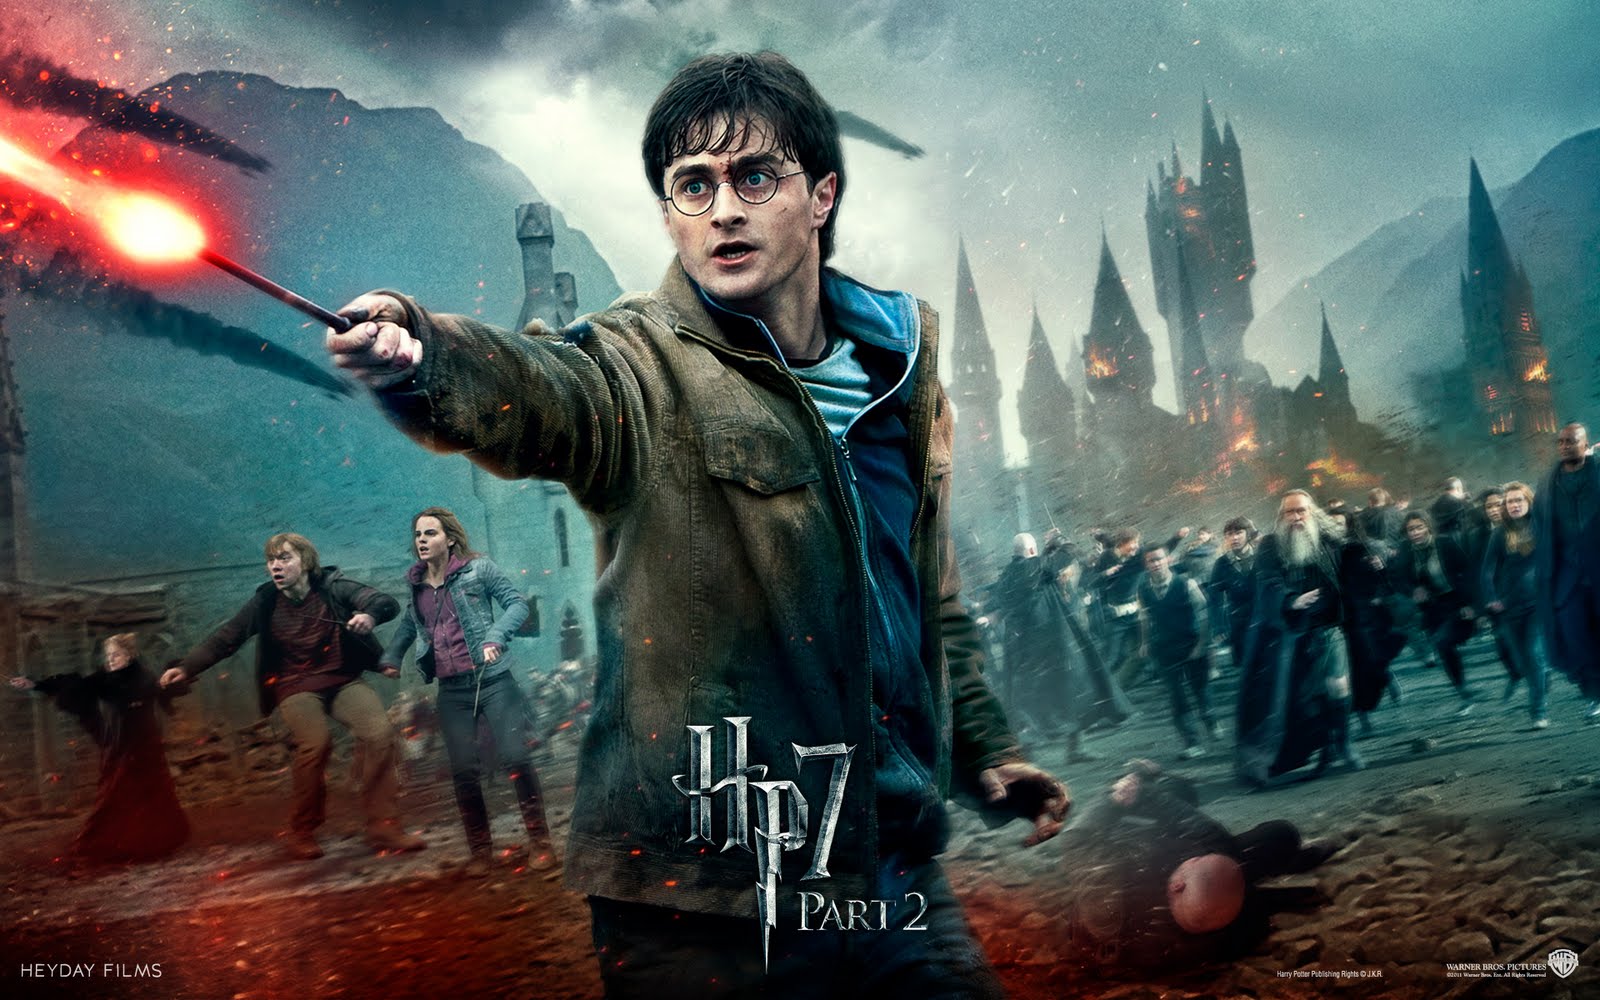 Harry Potter And The Deathly Hallows: Part 2 #1